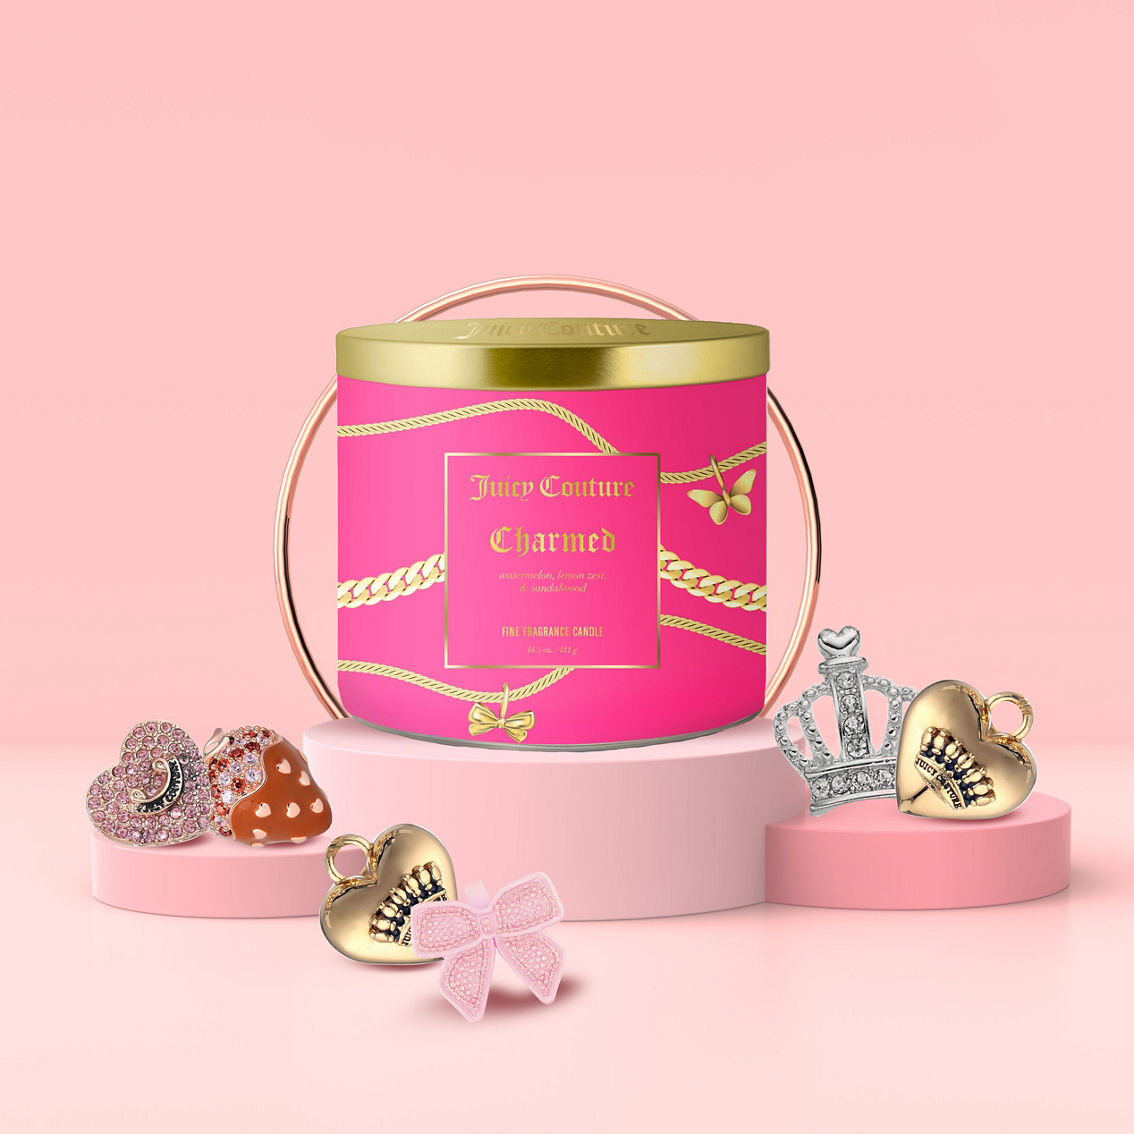 Juicy Couture Charmed Candle - Image 3 of 4